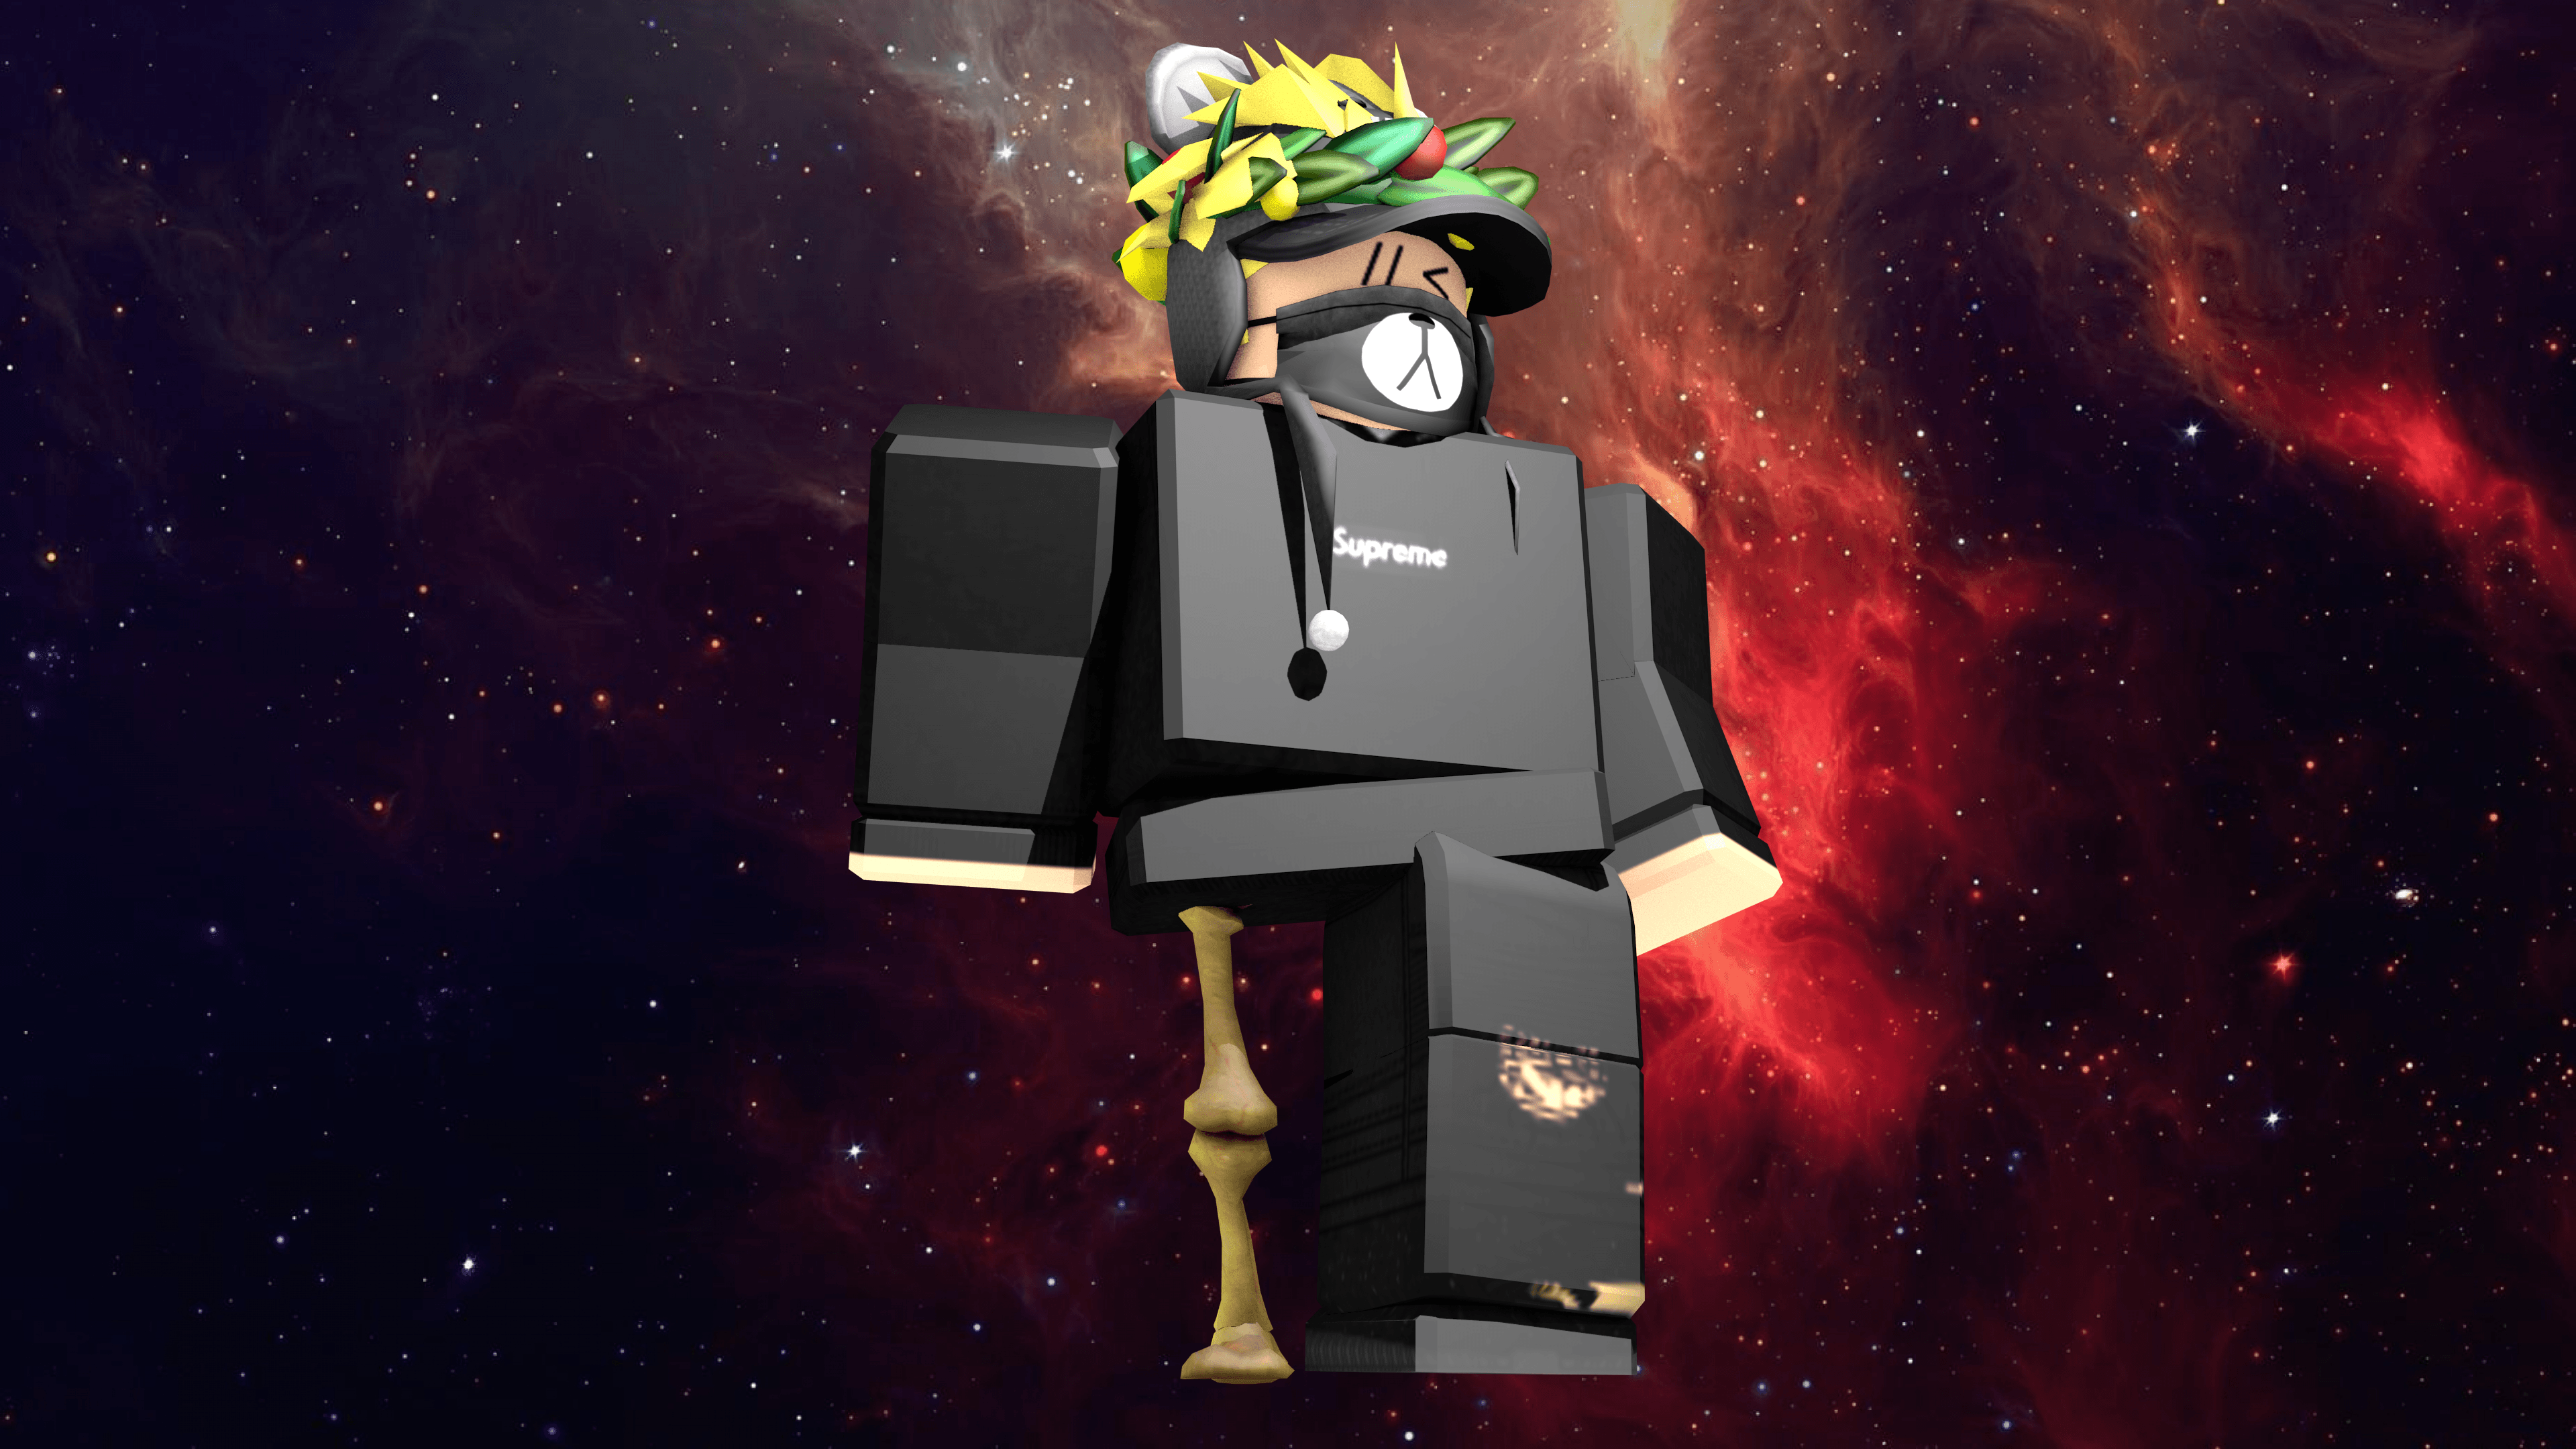 20 Perfect wallpaper aesthetic roblox boy You Can Save It At No Cost ...